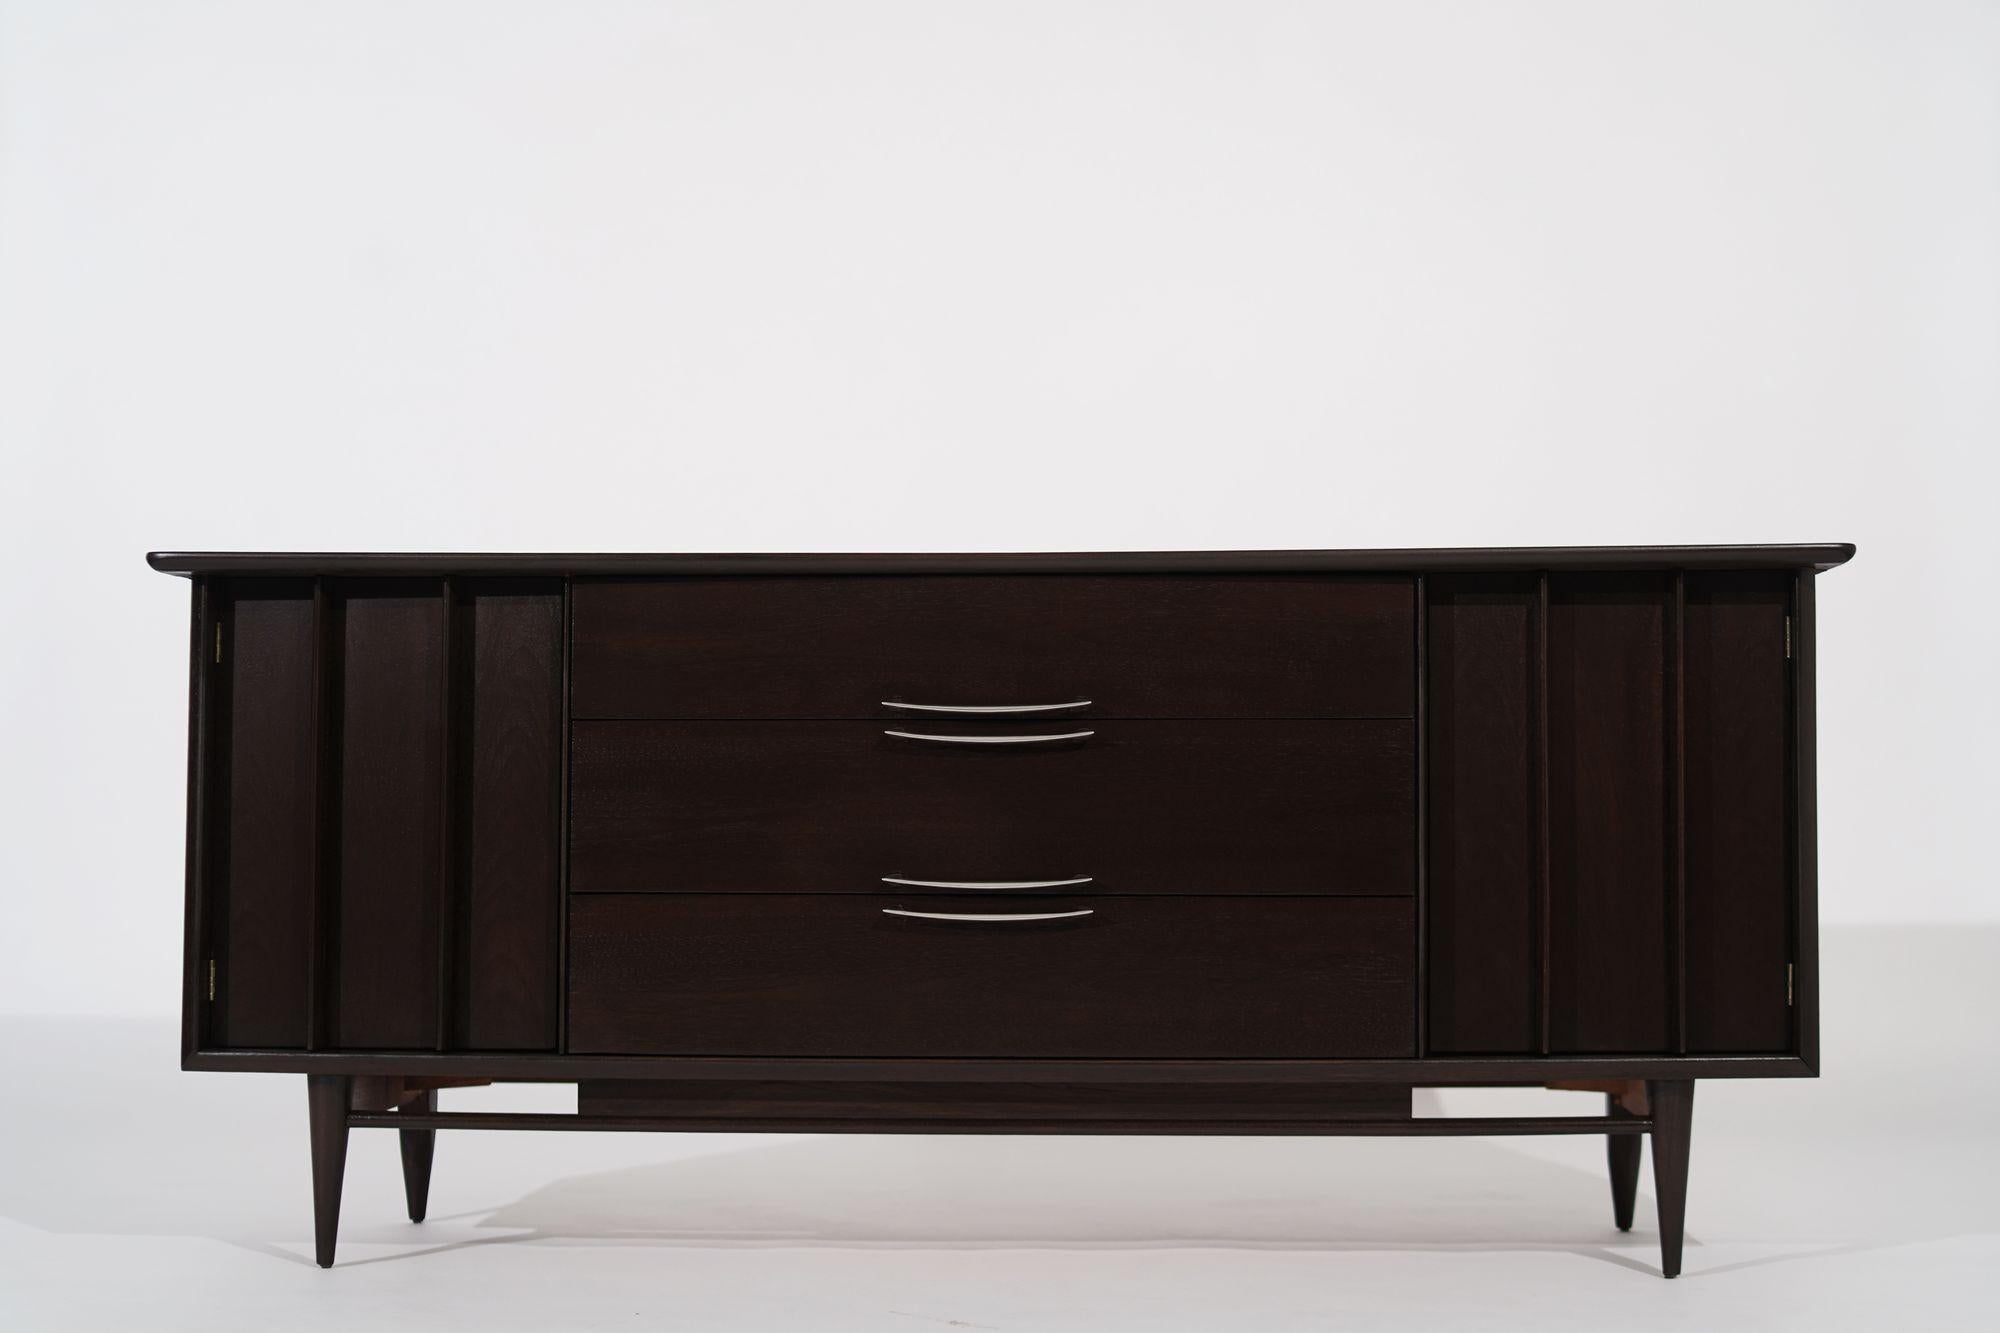 A beautiful Mid-Century Modern credenza by Kent Coffey, circa 1950-1959. Executed in walnut, completely restored. 
Other designers from this period include Paul McCobb, Paul Frankl, Jens Risom, and T.H. Robsjohn-Gibbings.